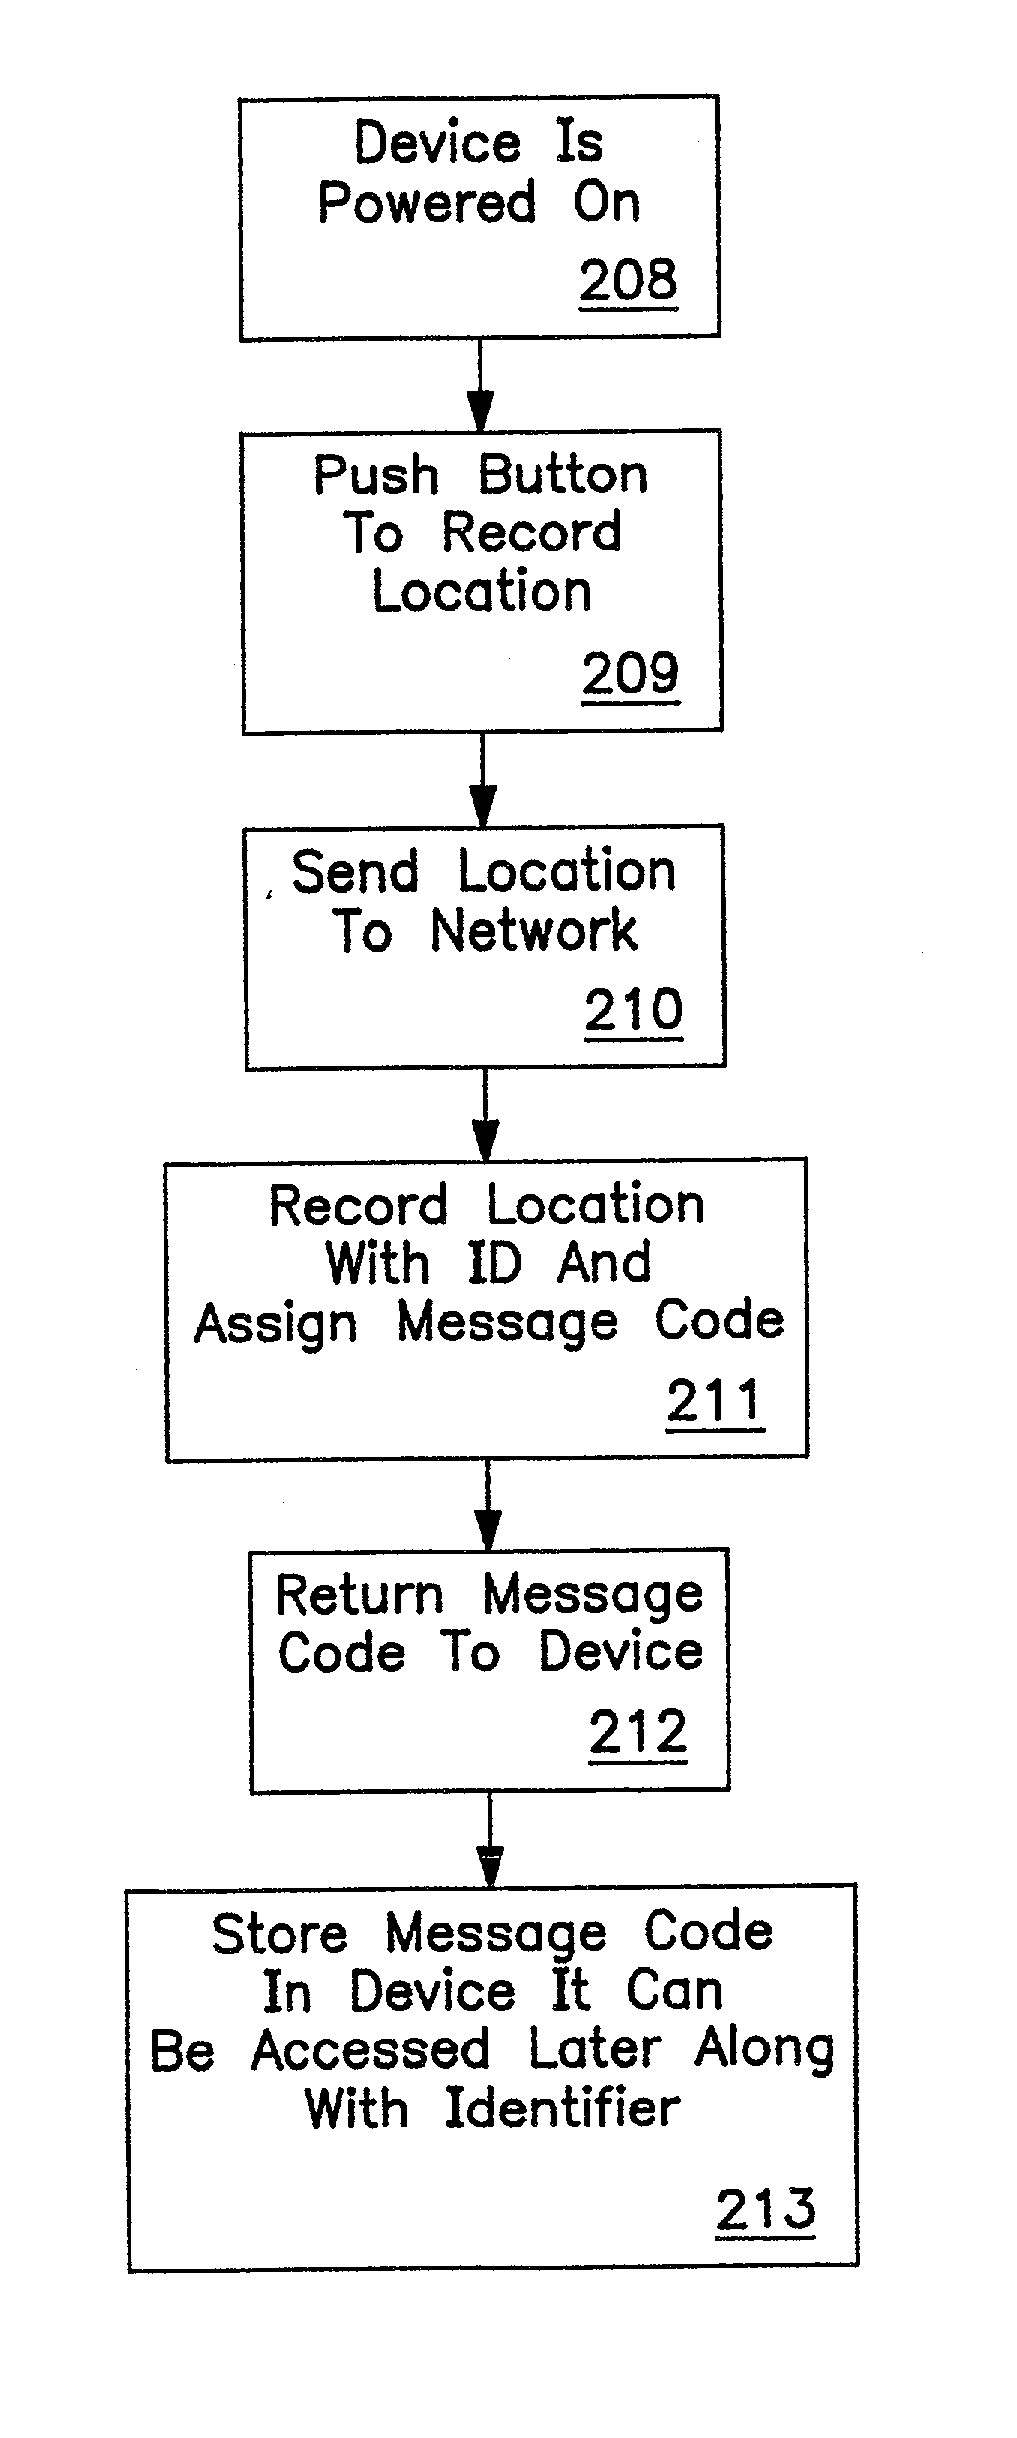 System and method of accessing and recording messages at coordinate way points